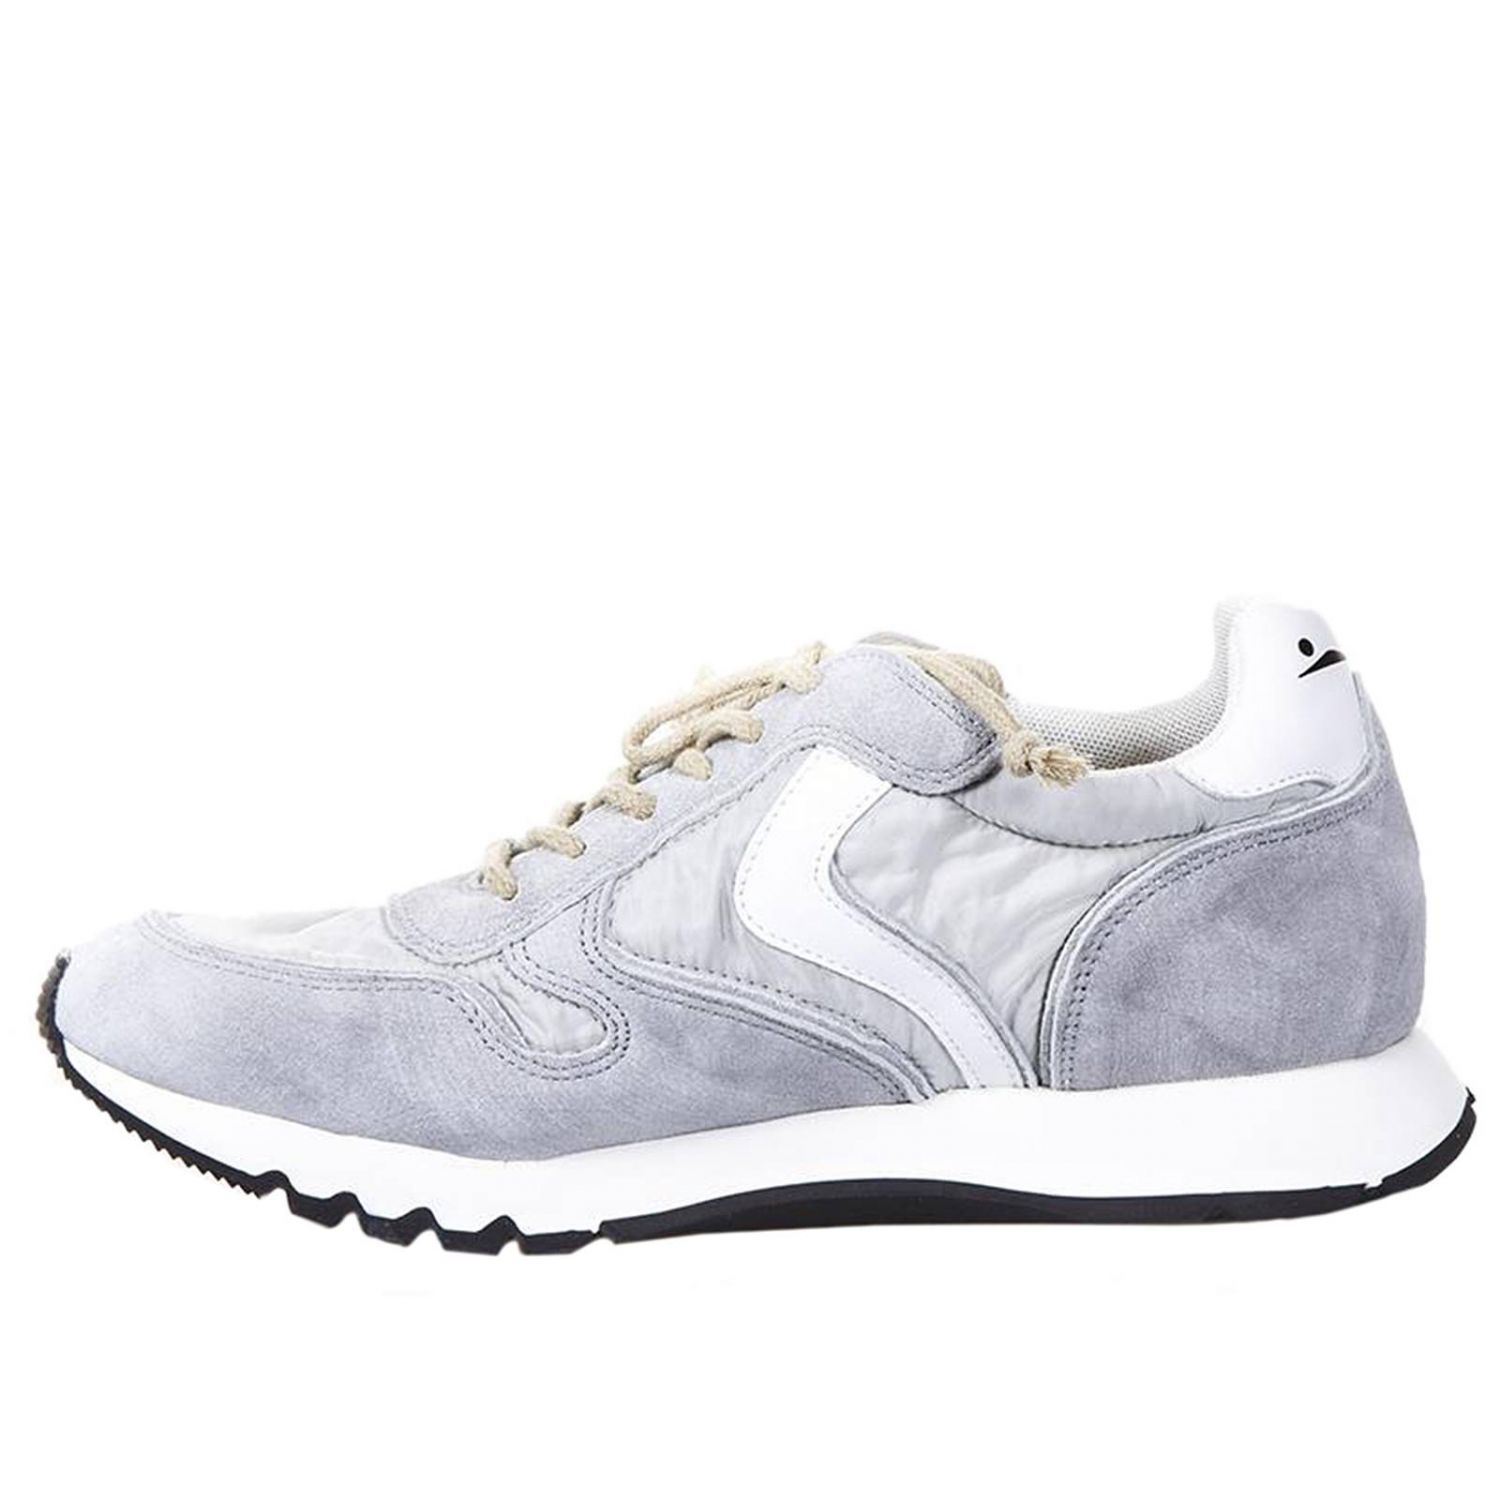 Voile Blanche Outlet: Shoes women - Ice | Sneakers Voile Blanche JULIA ...